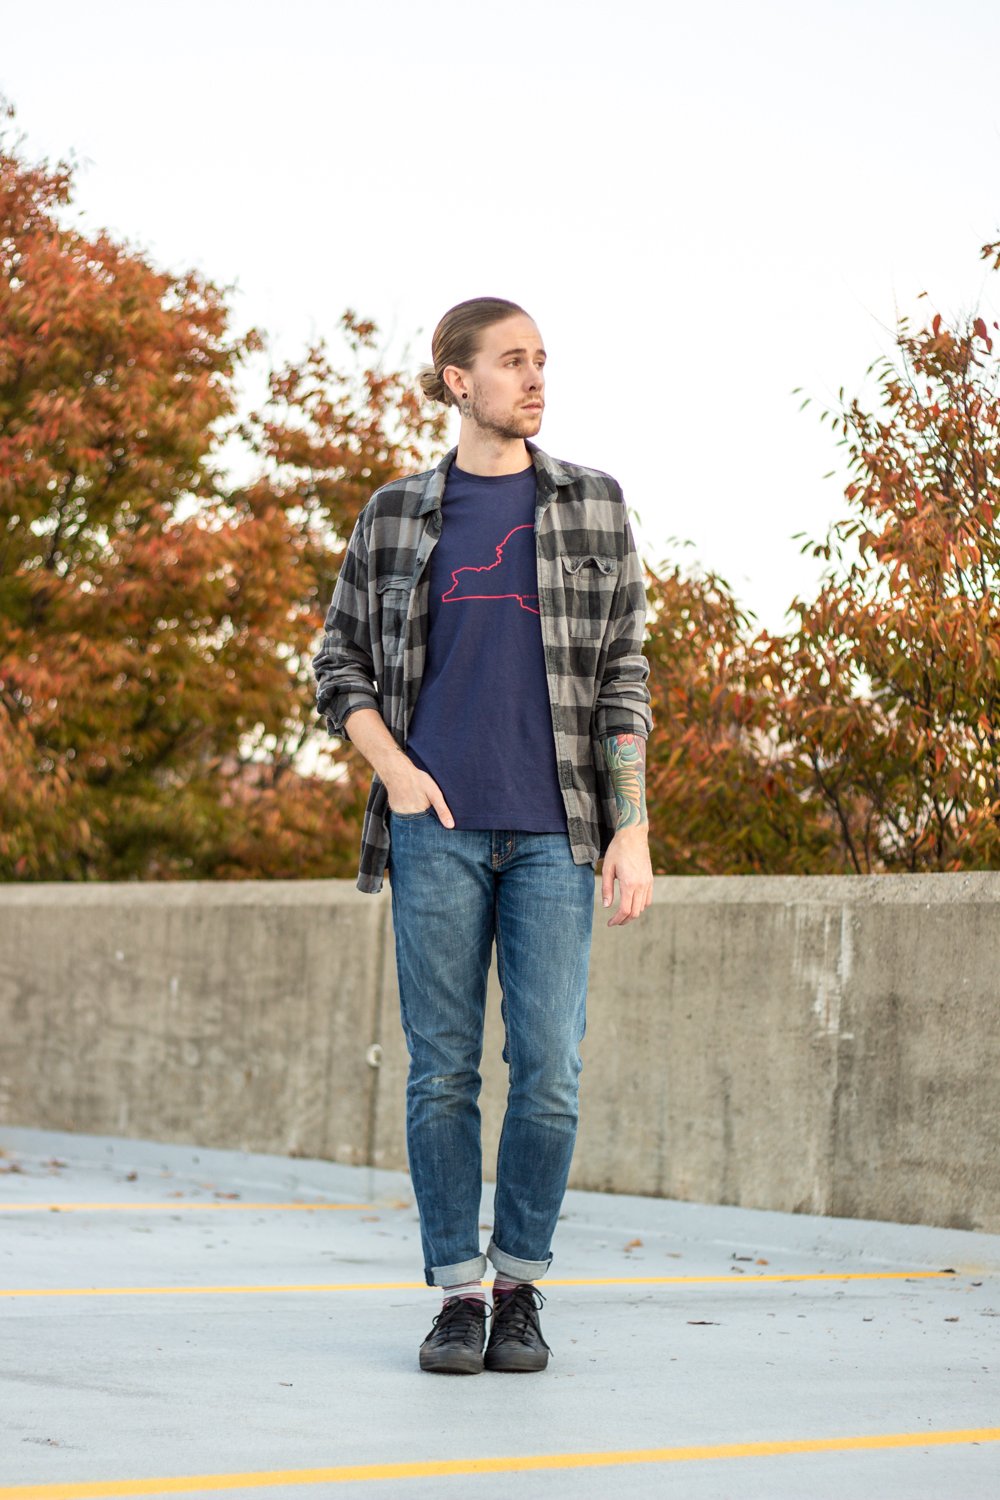 The Kentucky Gent, a men’s fashion and lifestyle blogger in Louisville, Kentucky, wearing Original Penguin Tee, Devil’s Rejects Plaid Shirt, Levi’s 511 Jeans, Richer Poorer Socks, and Converse Chuck Taylors.